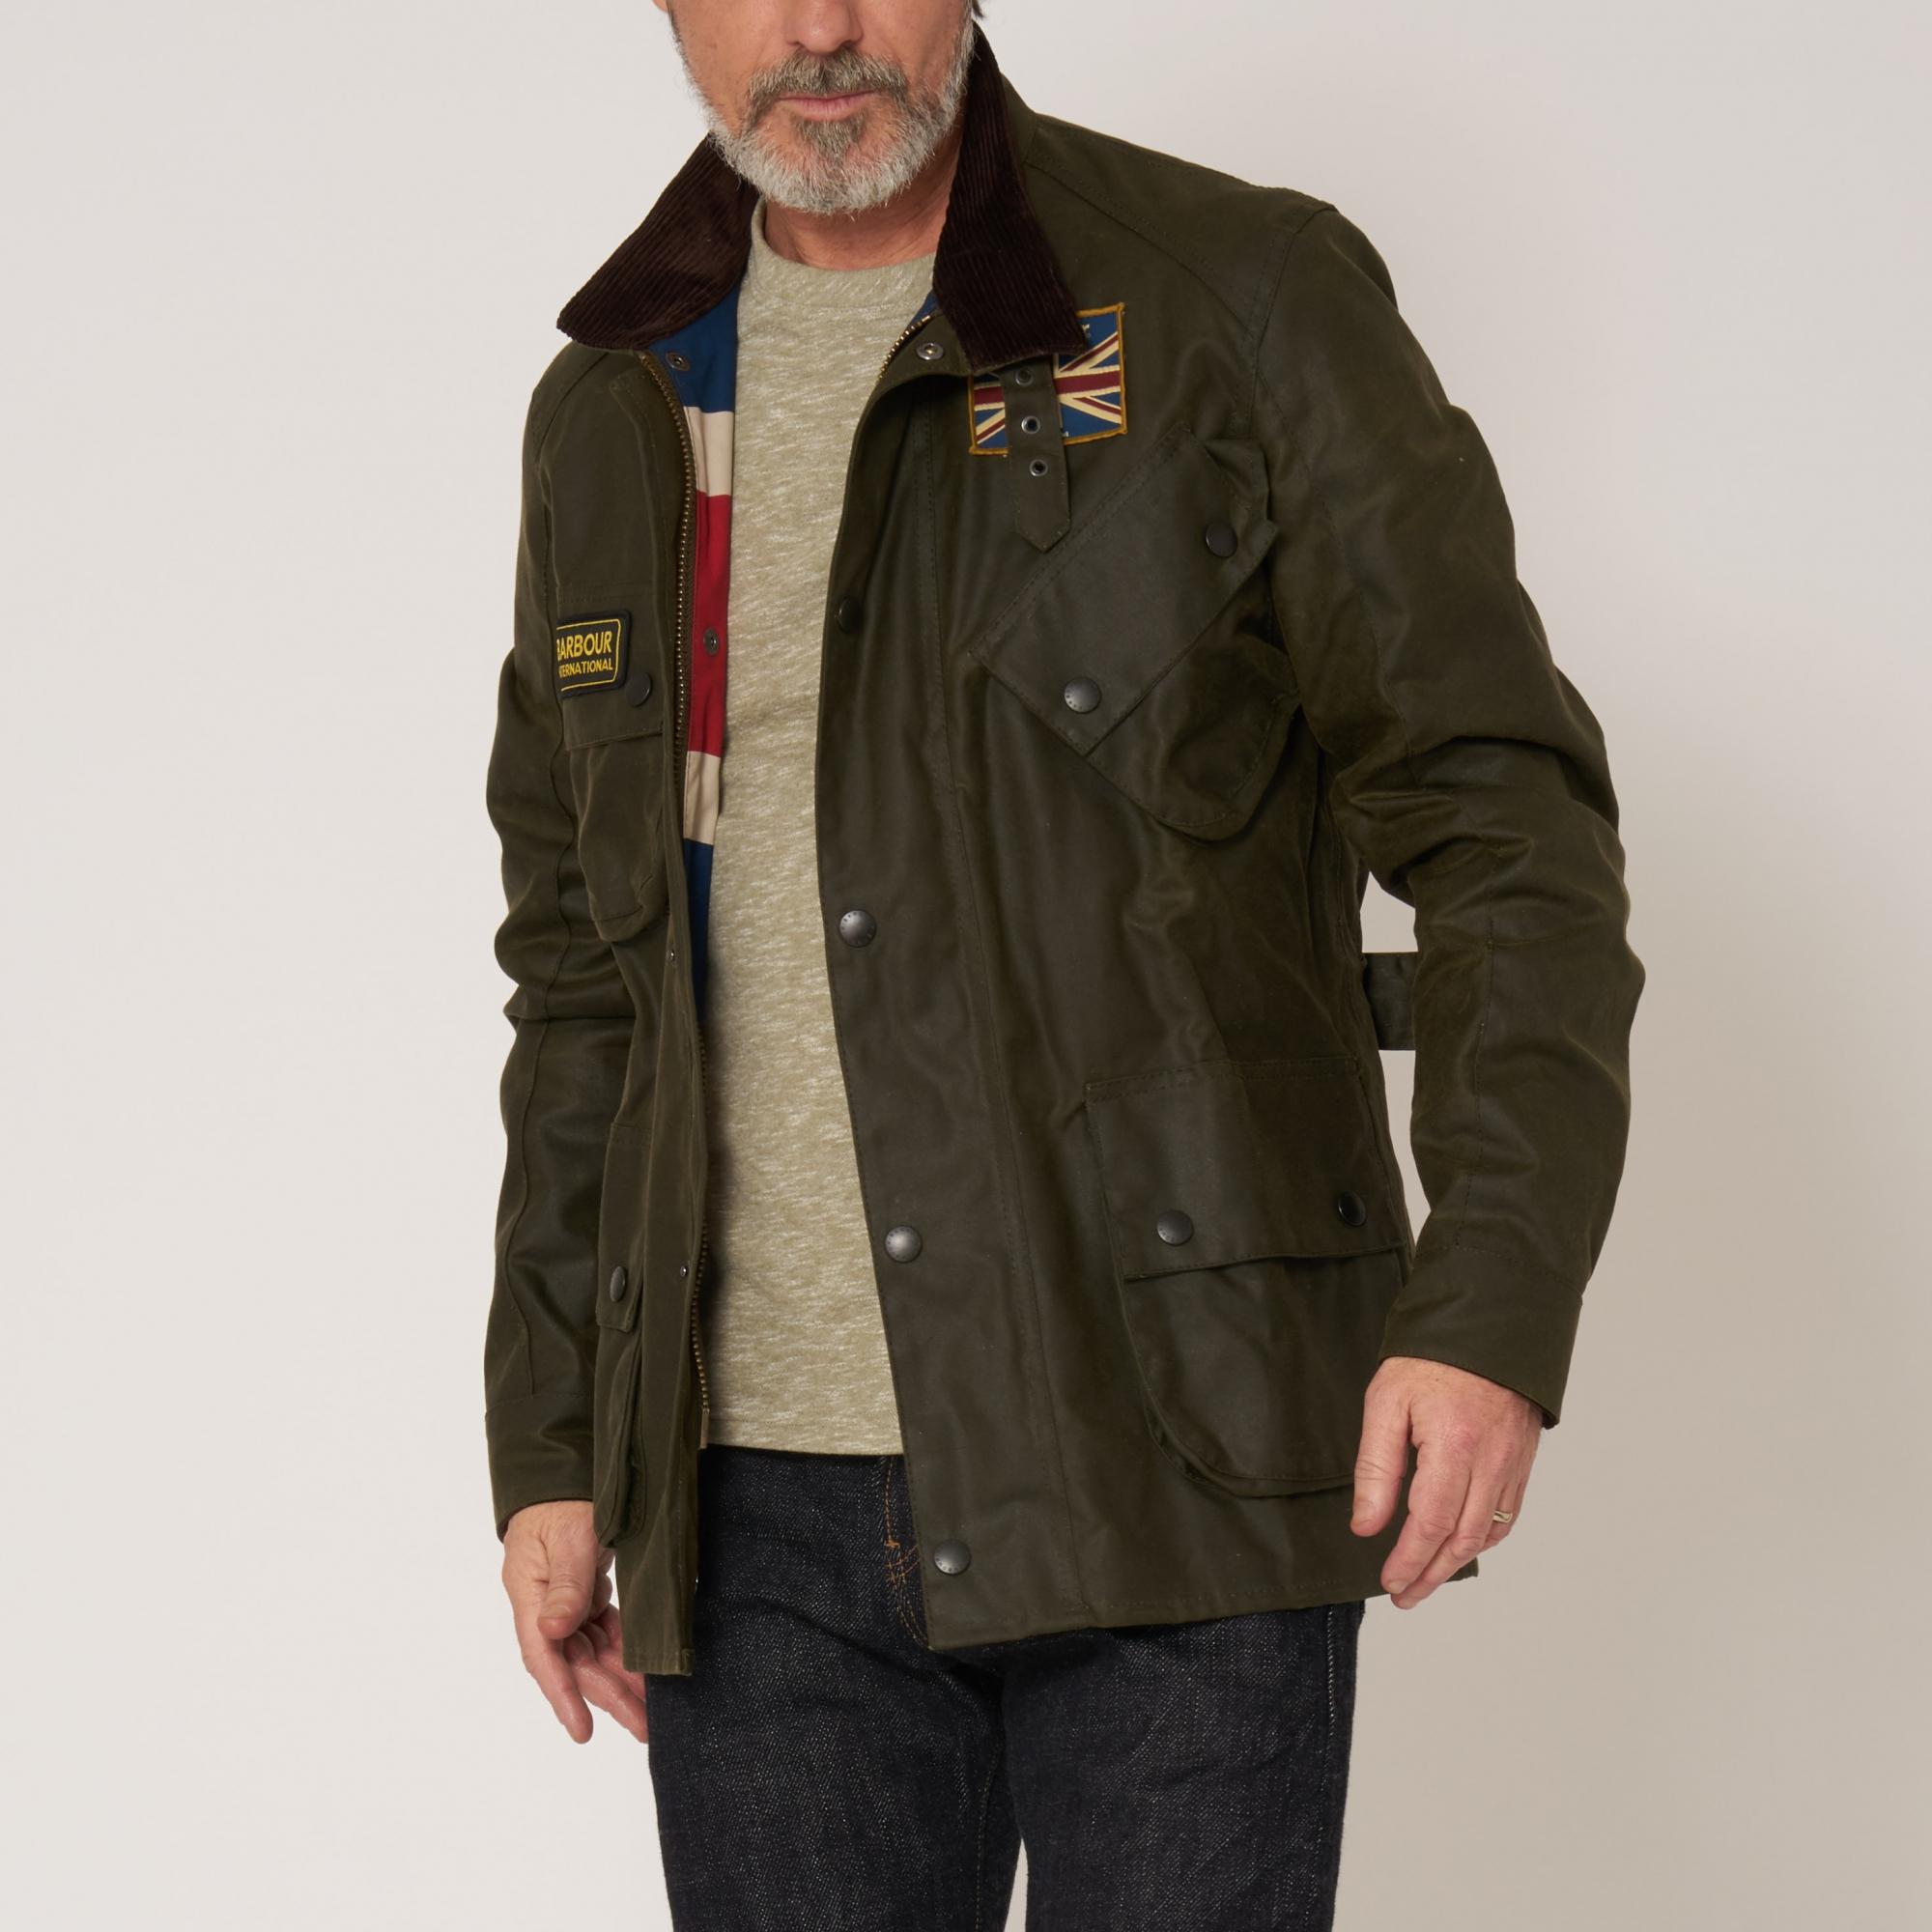 buy > barbour union jack jacket mens, Up to 78% OFF